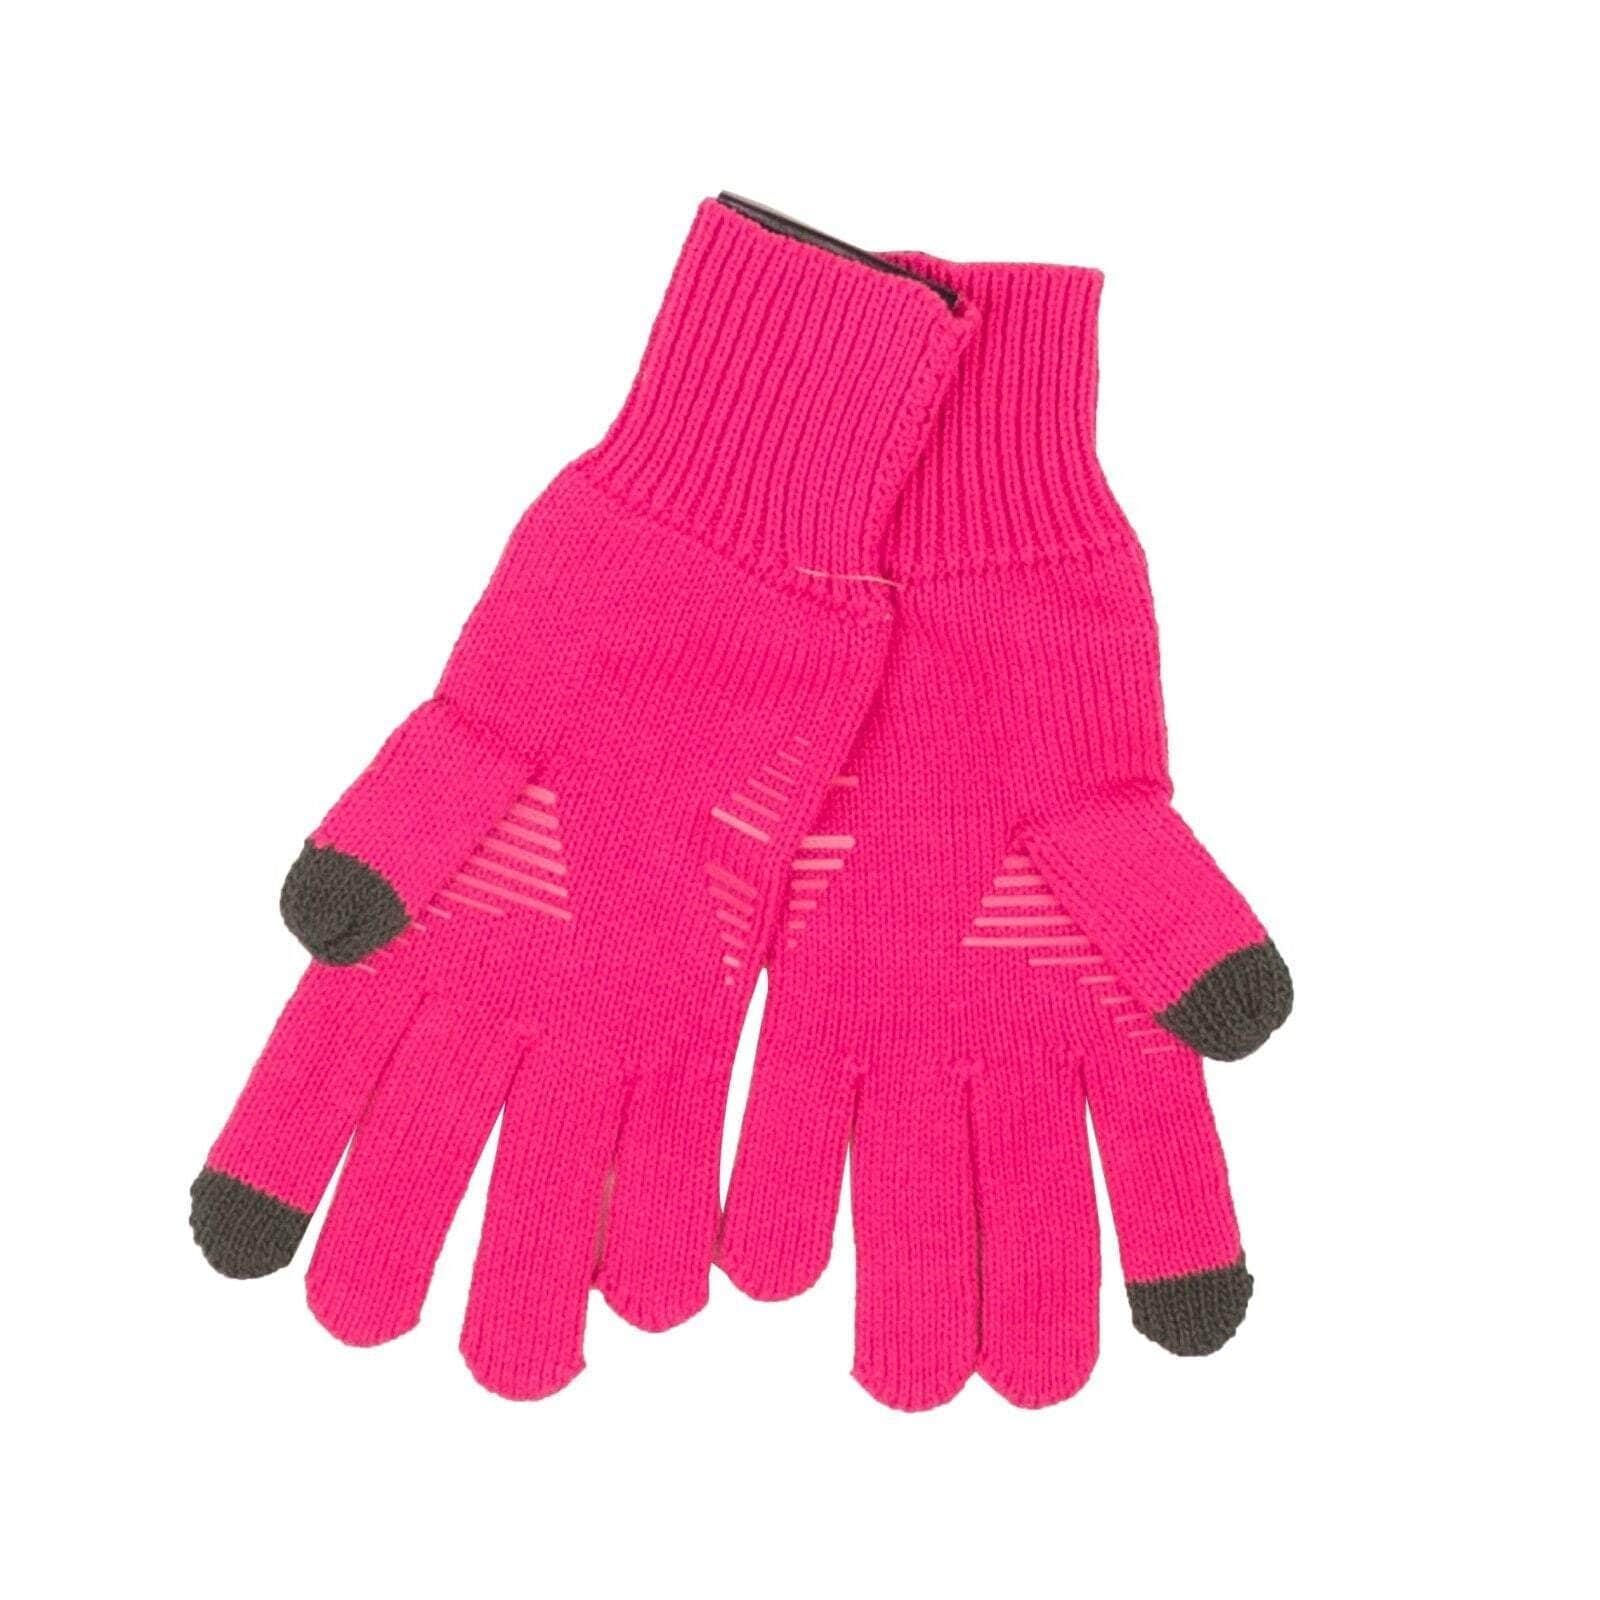 Opening Ceremony channelenable-all, chicmi, couponcollection, gender-mens, gender-womens, main-accessories OS Pink OC Logo Knit Gloves 95-OCY-3122/OS 95-OCY-3122/OS